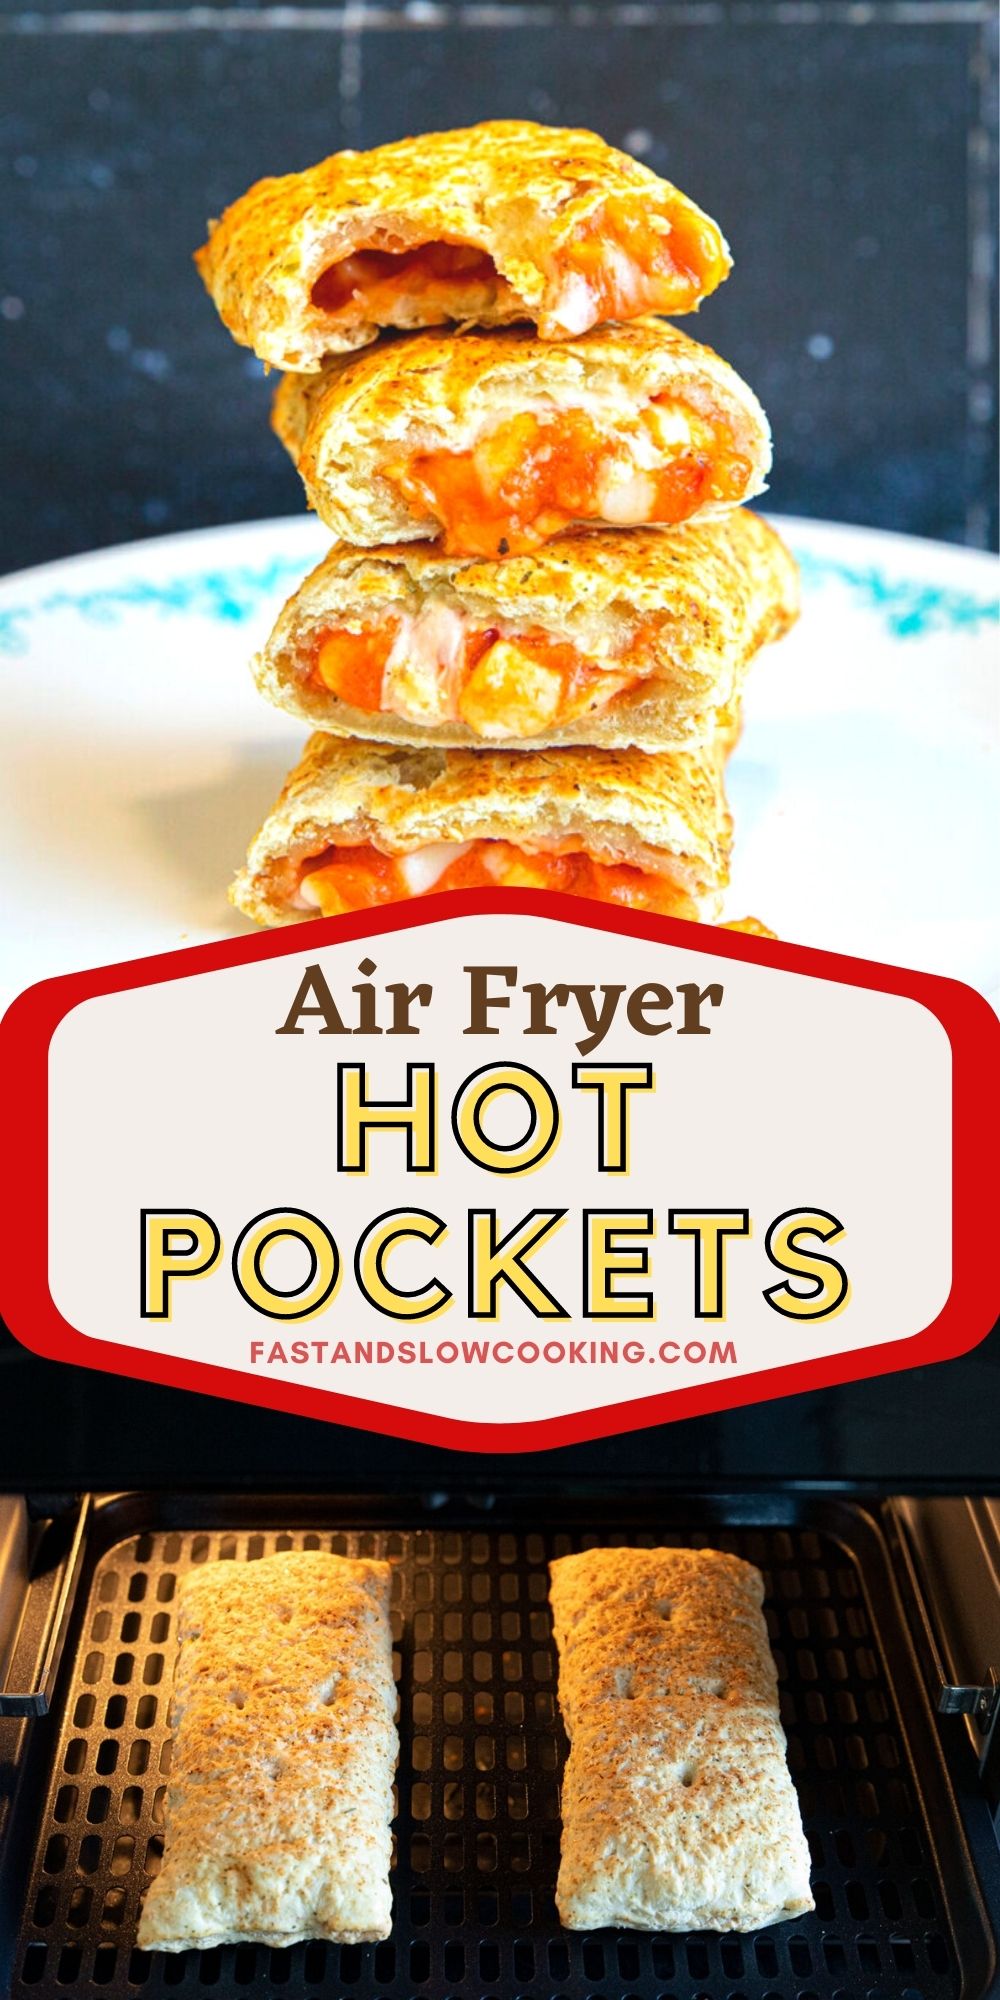 Fast and easy hot pockets made in your air fryer! A crispy outside and a gooey inside makes this the perfect snack!